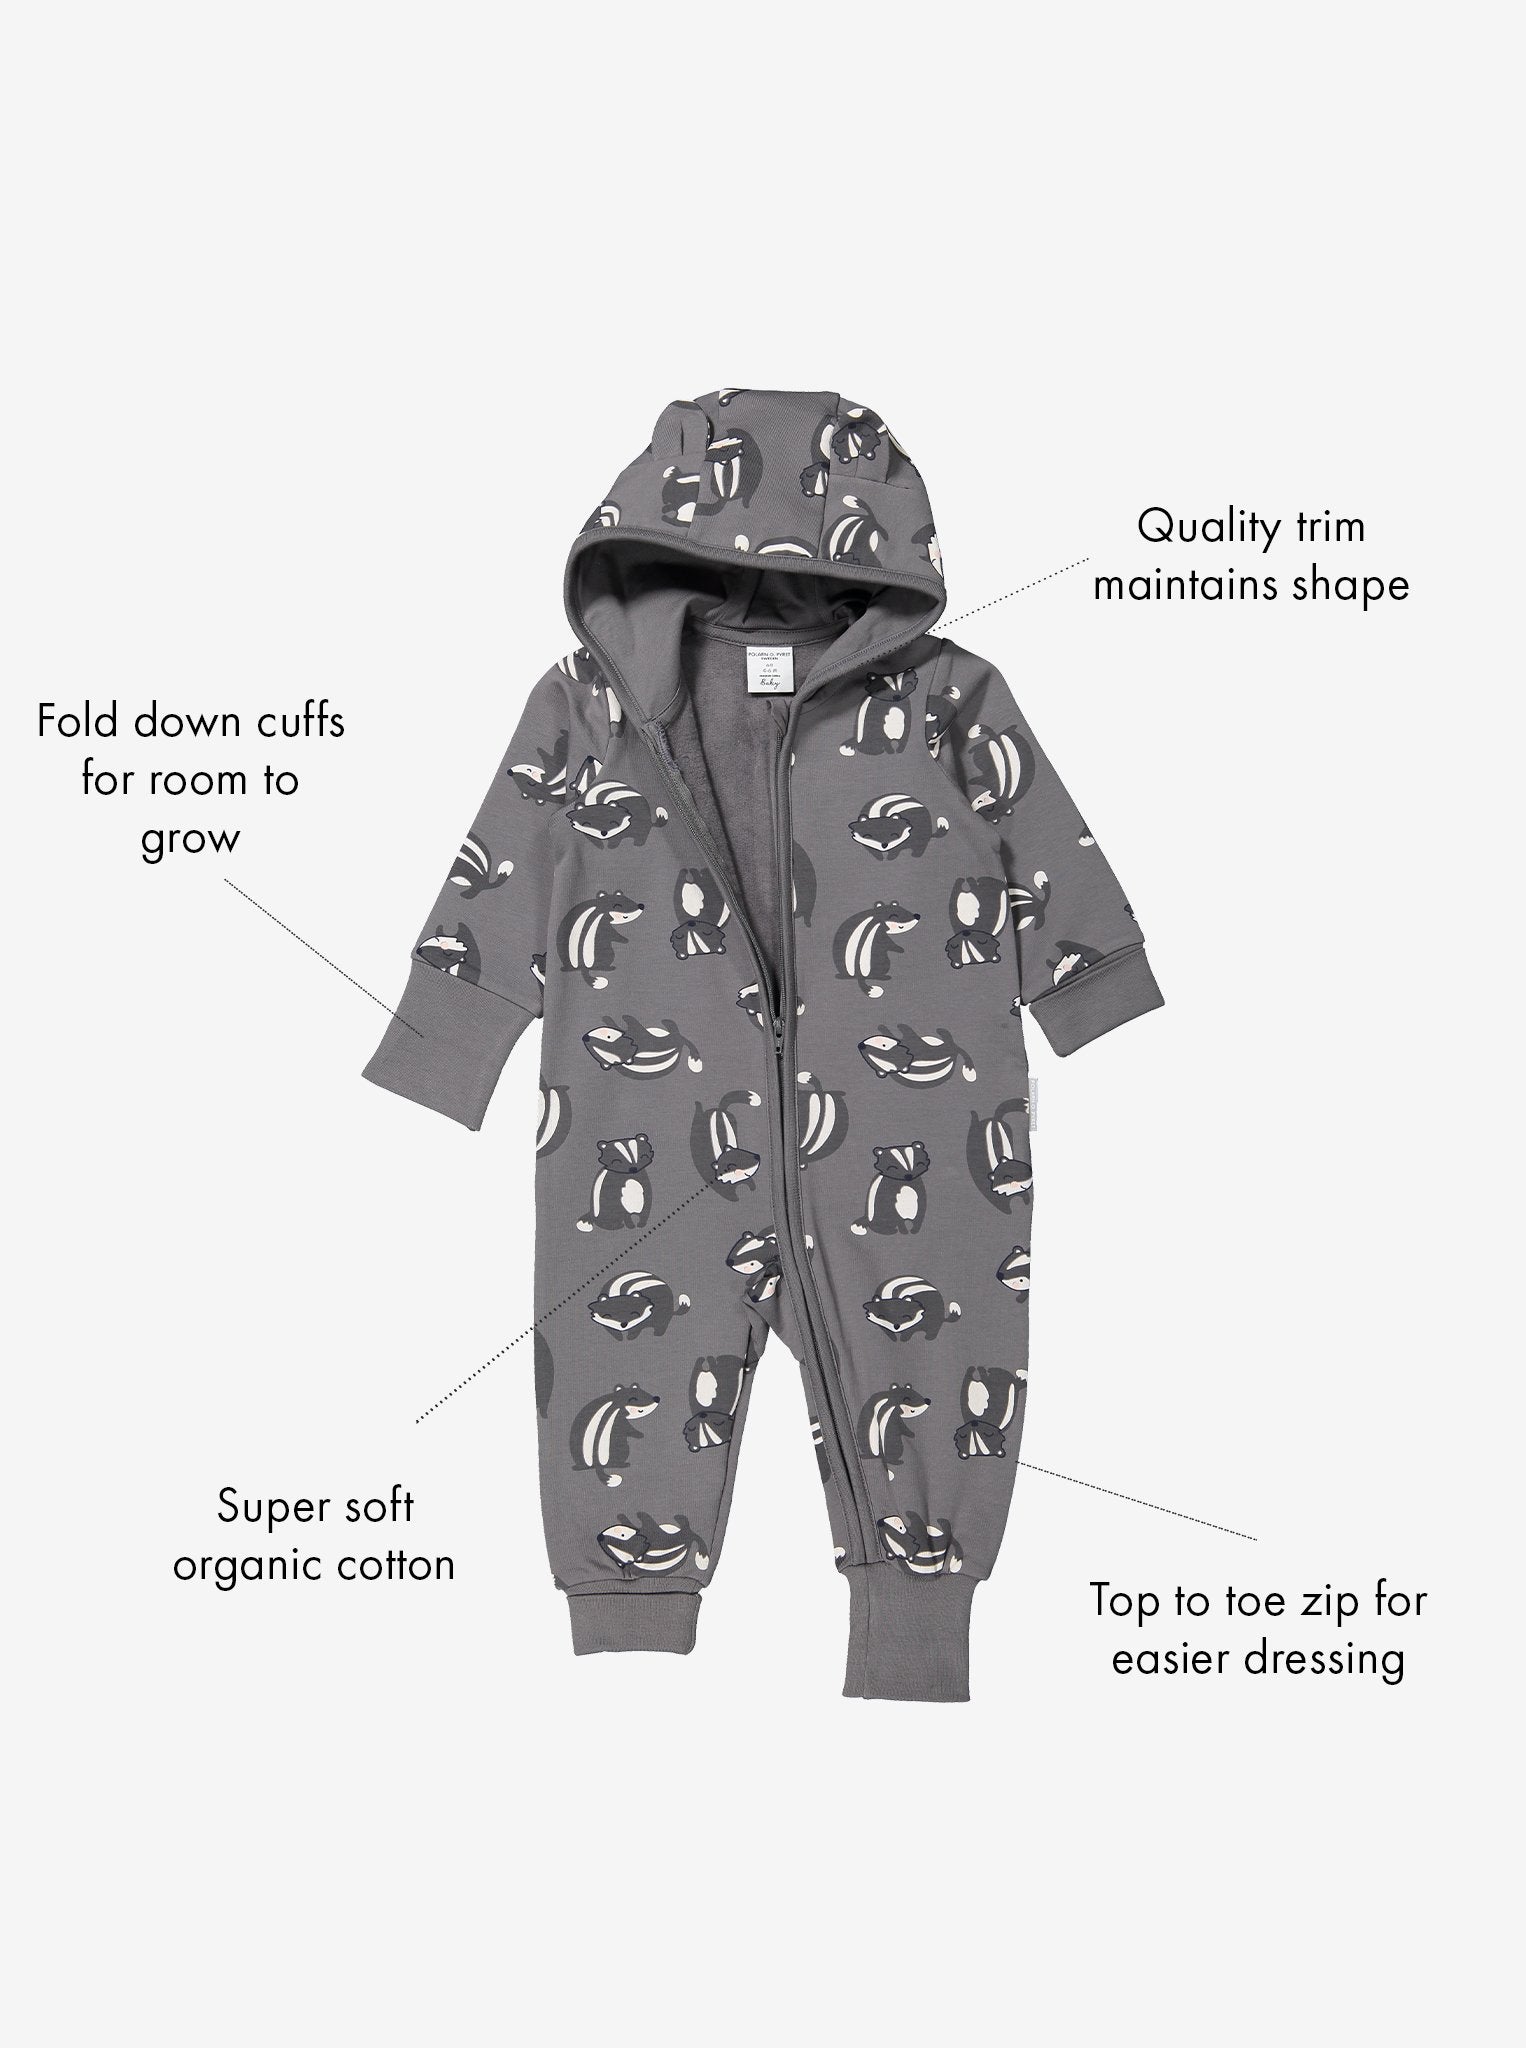 Grey Organic Baby All In One, Unisex Baby Clothes | Polarn O. Pyret UK